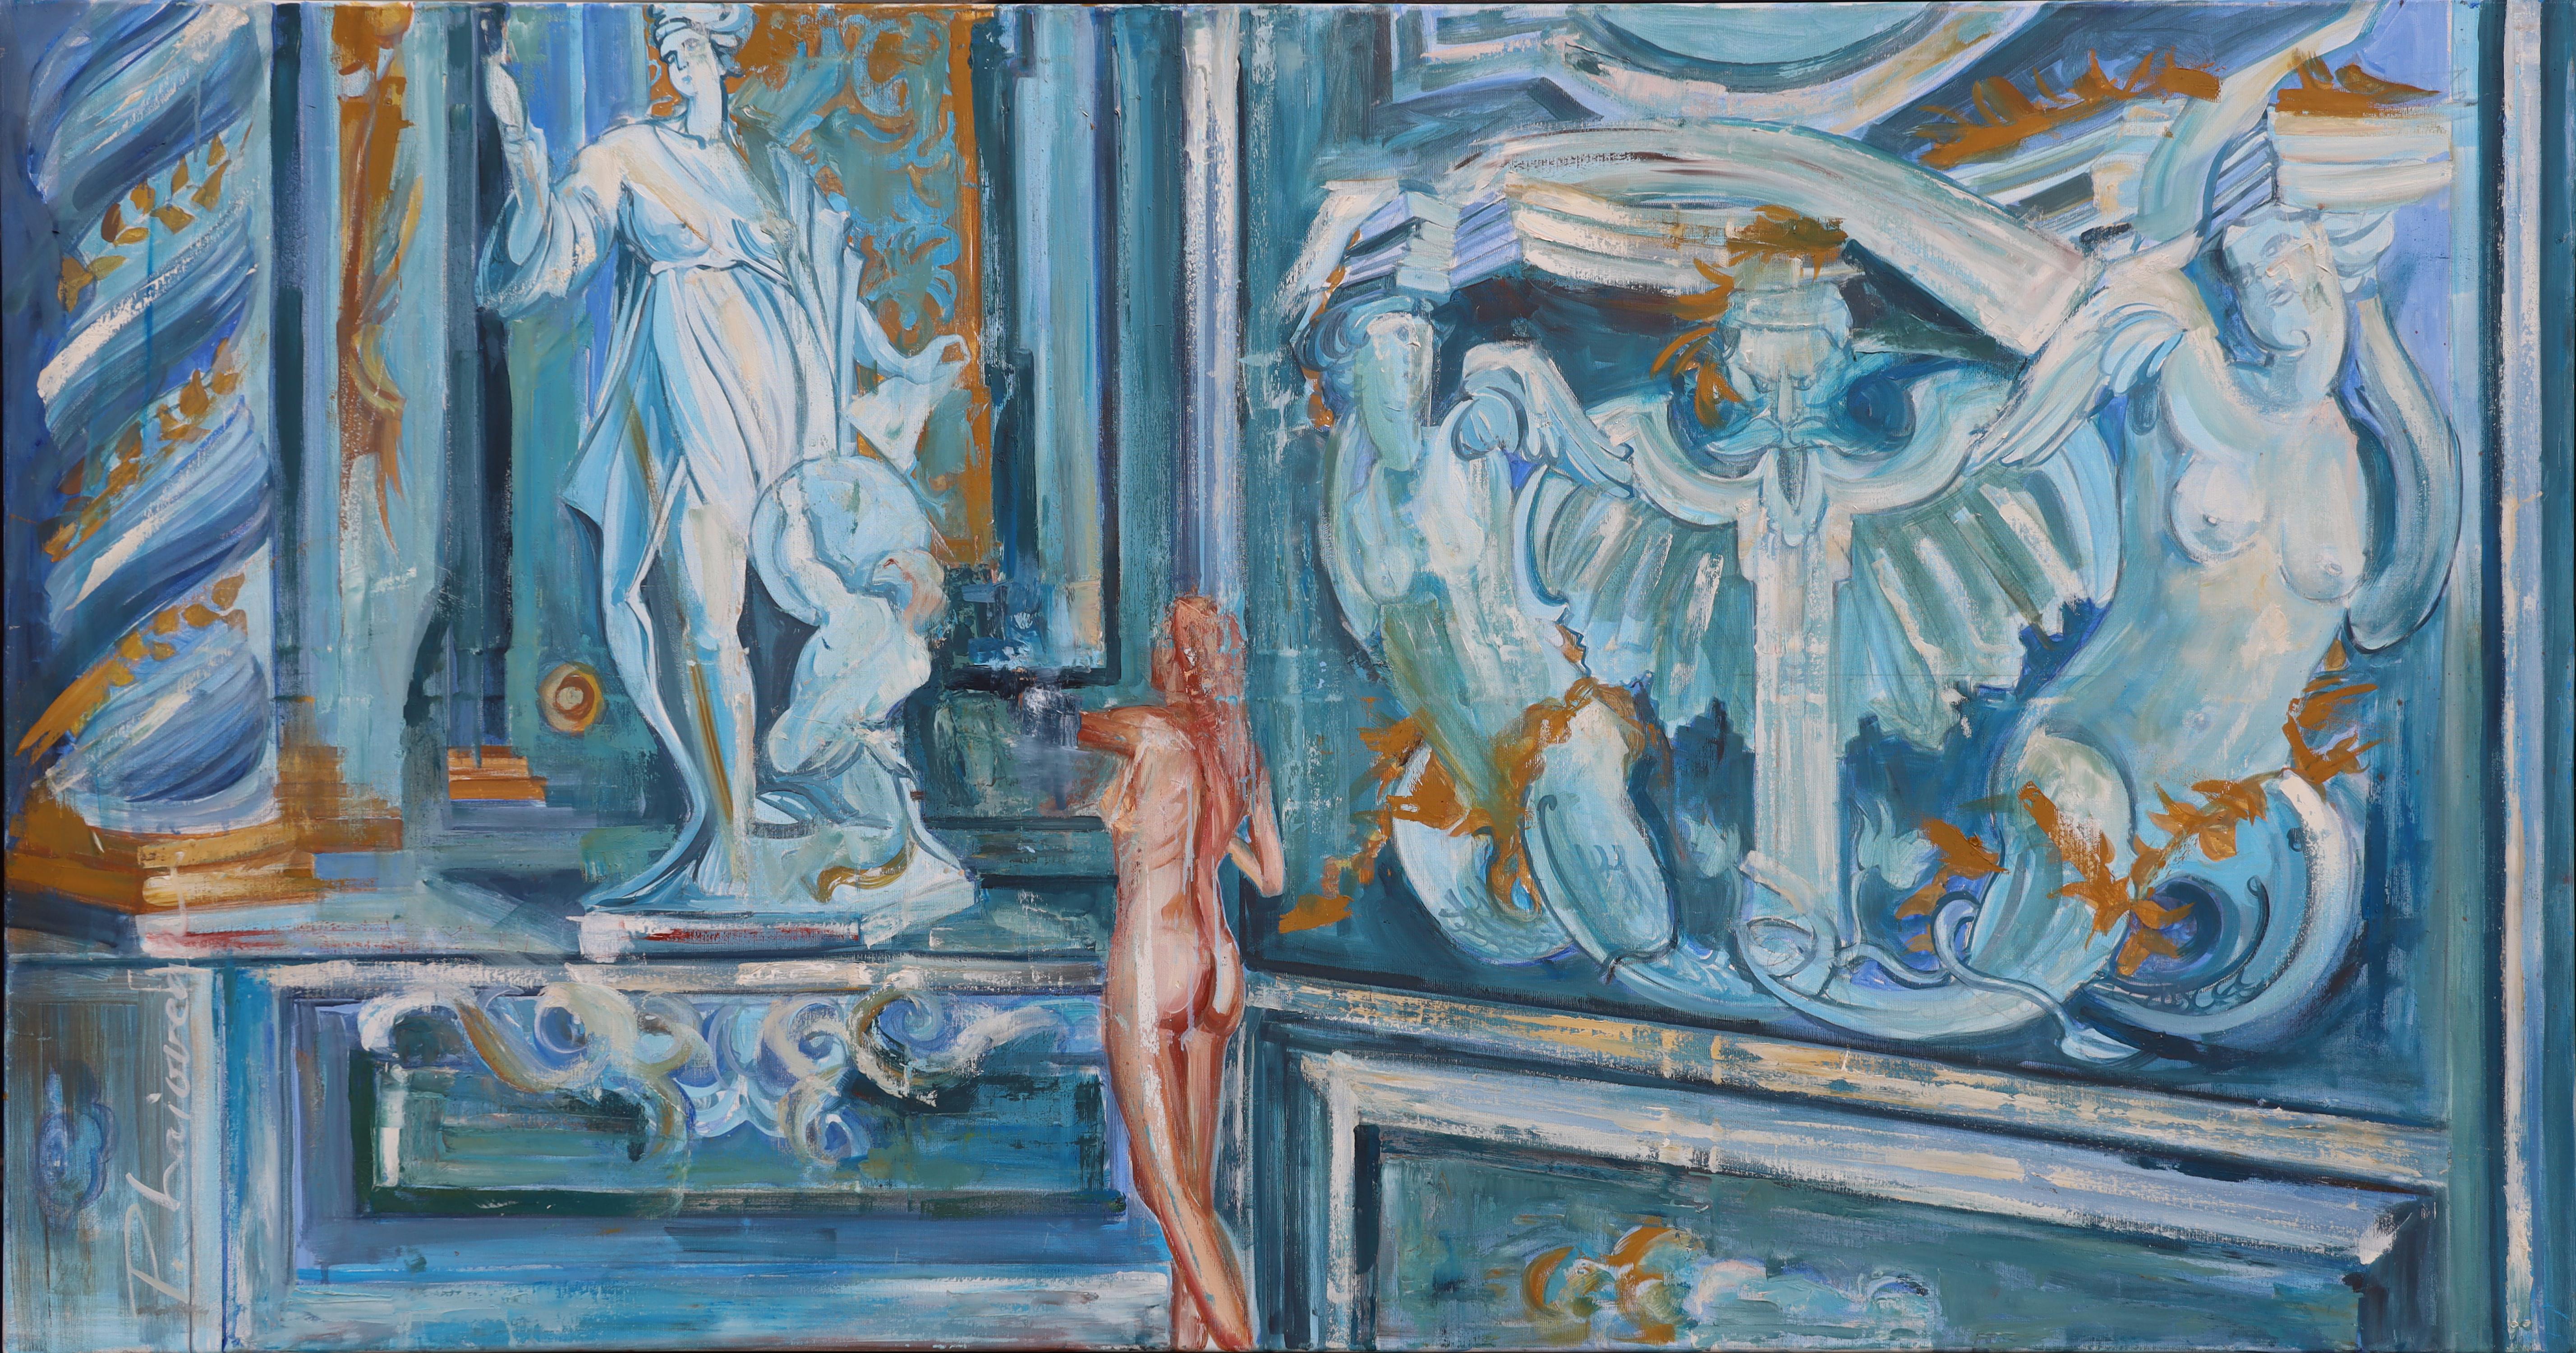 "The Fresco"
Oil on canvas
Large original, one-of-a-kind, painting - 33.5x63in / 85x160cm
Nude in a Italian Baroque interior, with blue marine painted fresco. 


Picture from the solo show "Nude in Interior" , 2022.



Shipped rolled in a tube